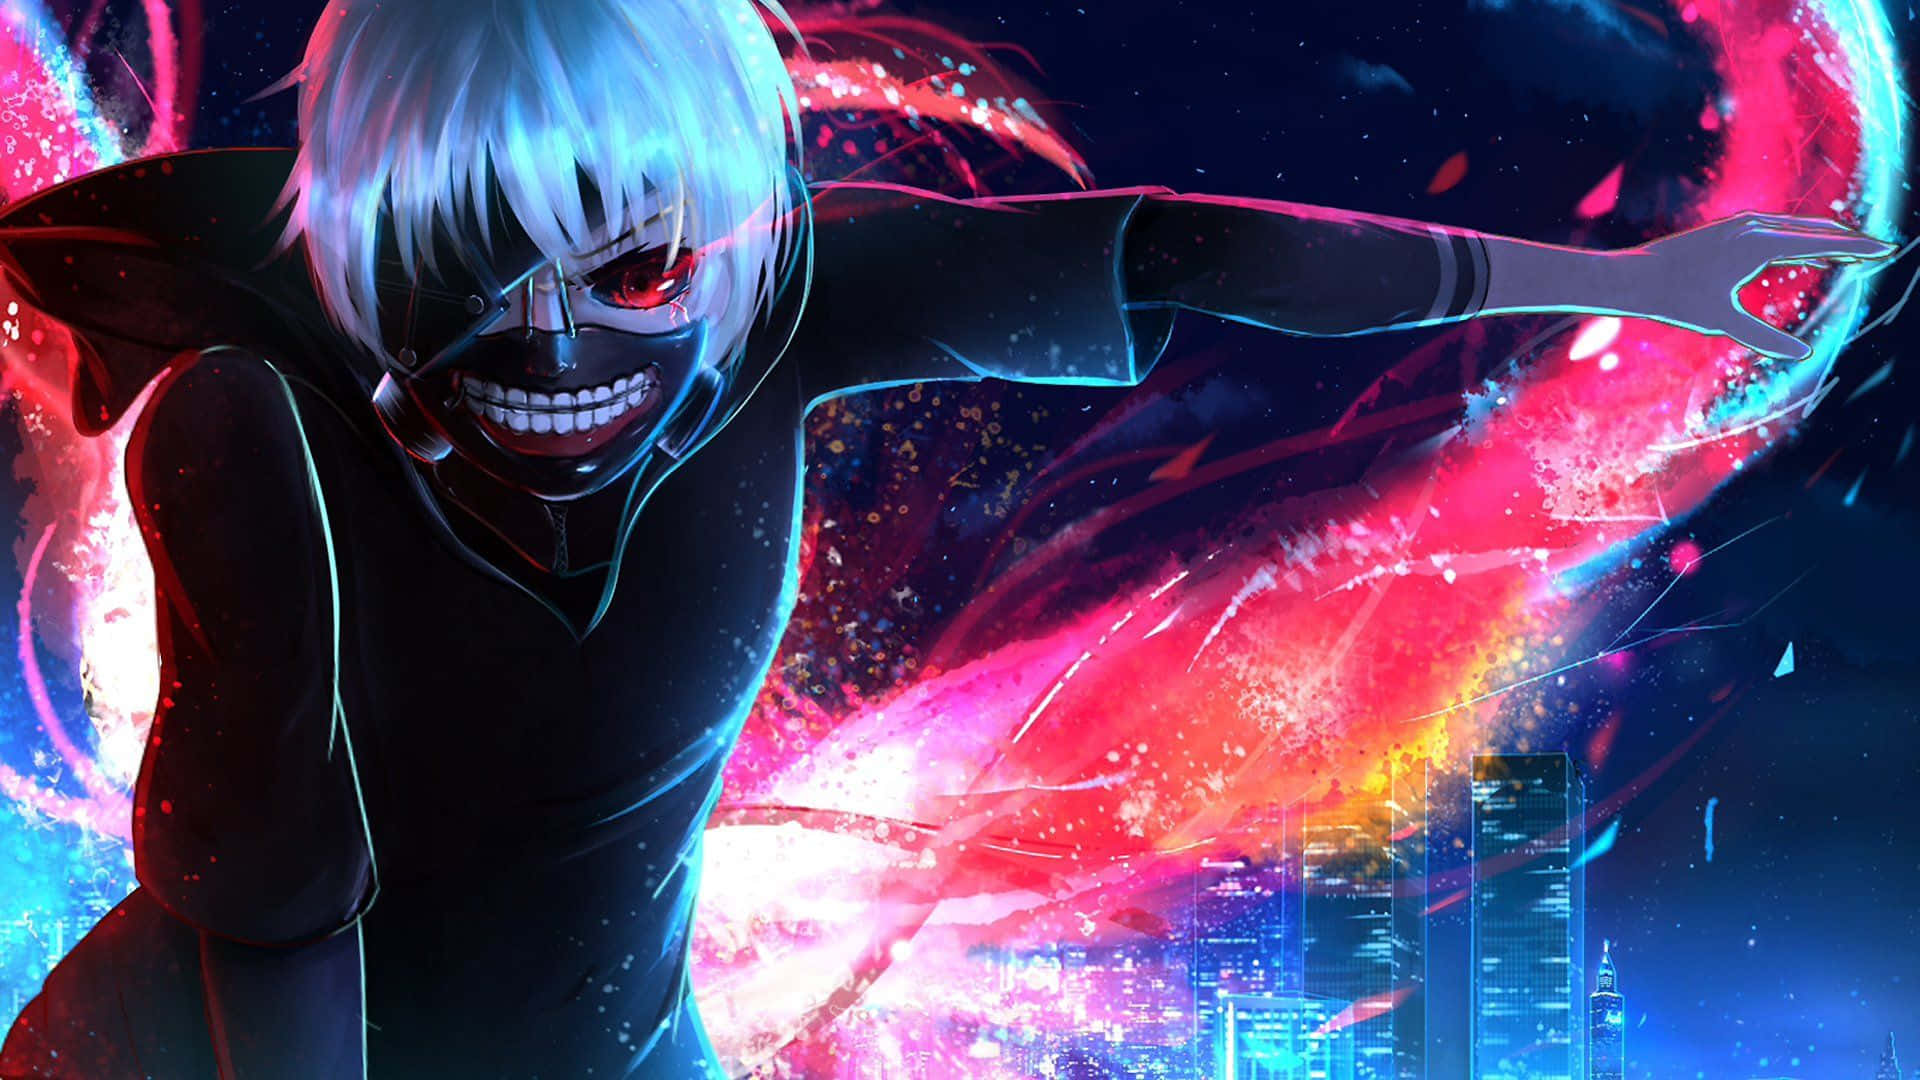 A mysterious and dangerous world awaits in Tokyo Ghoul